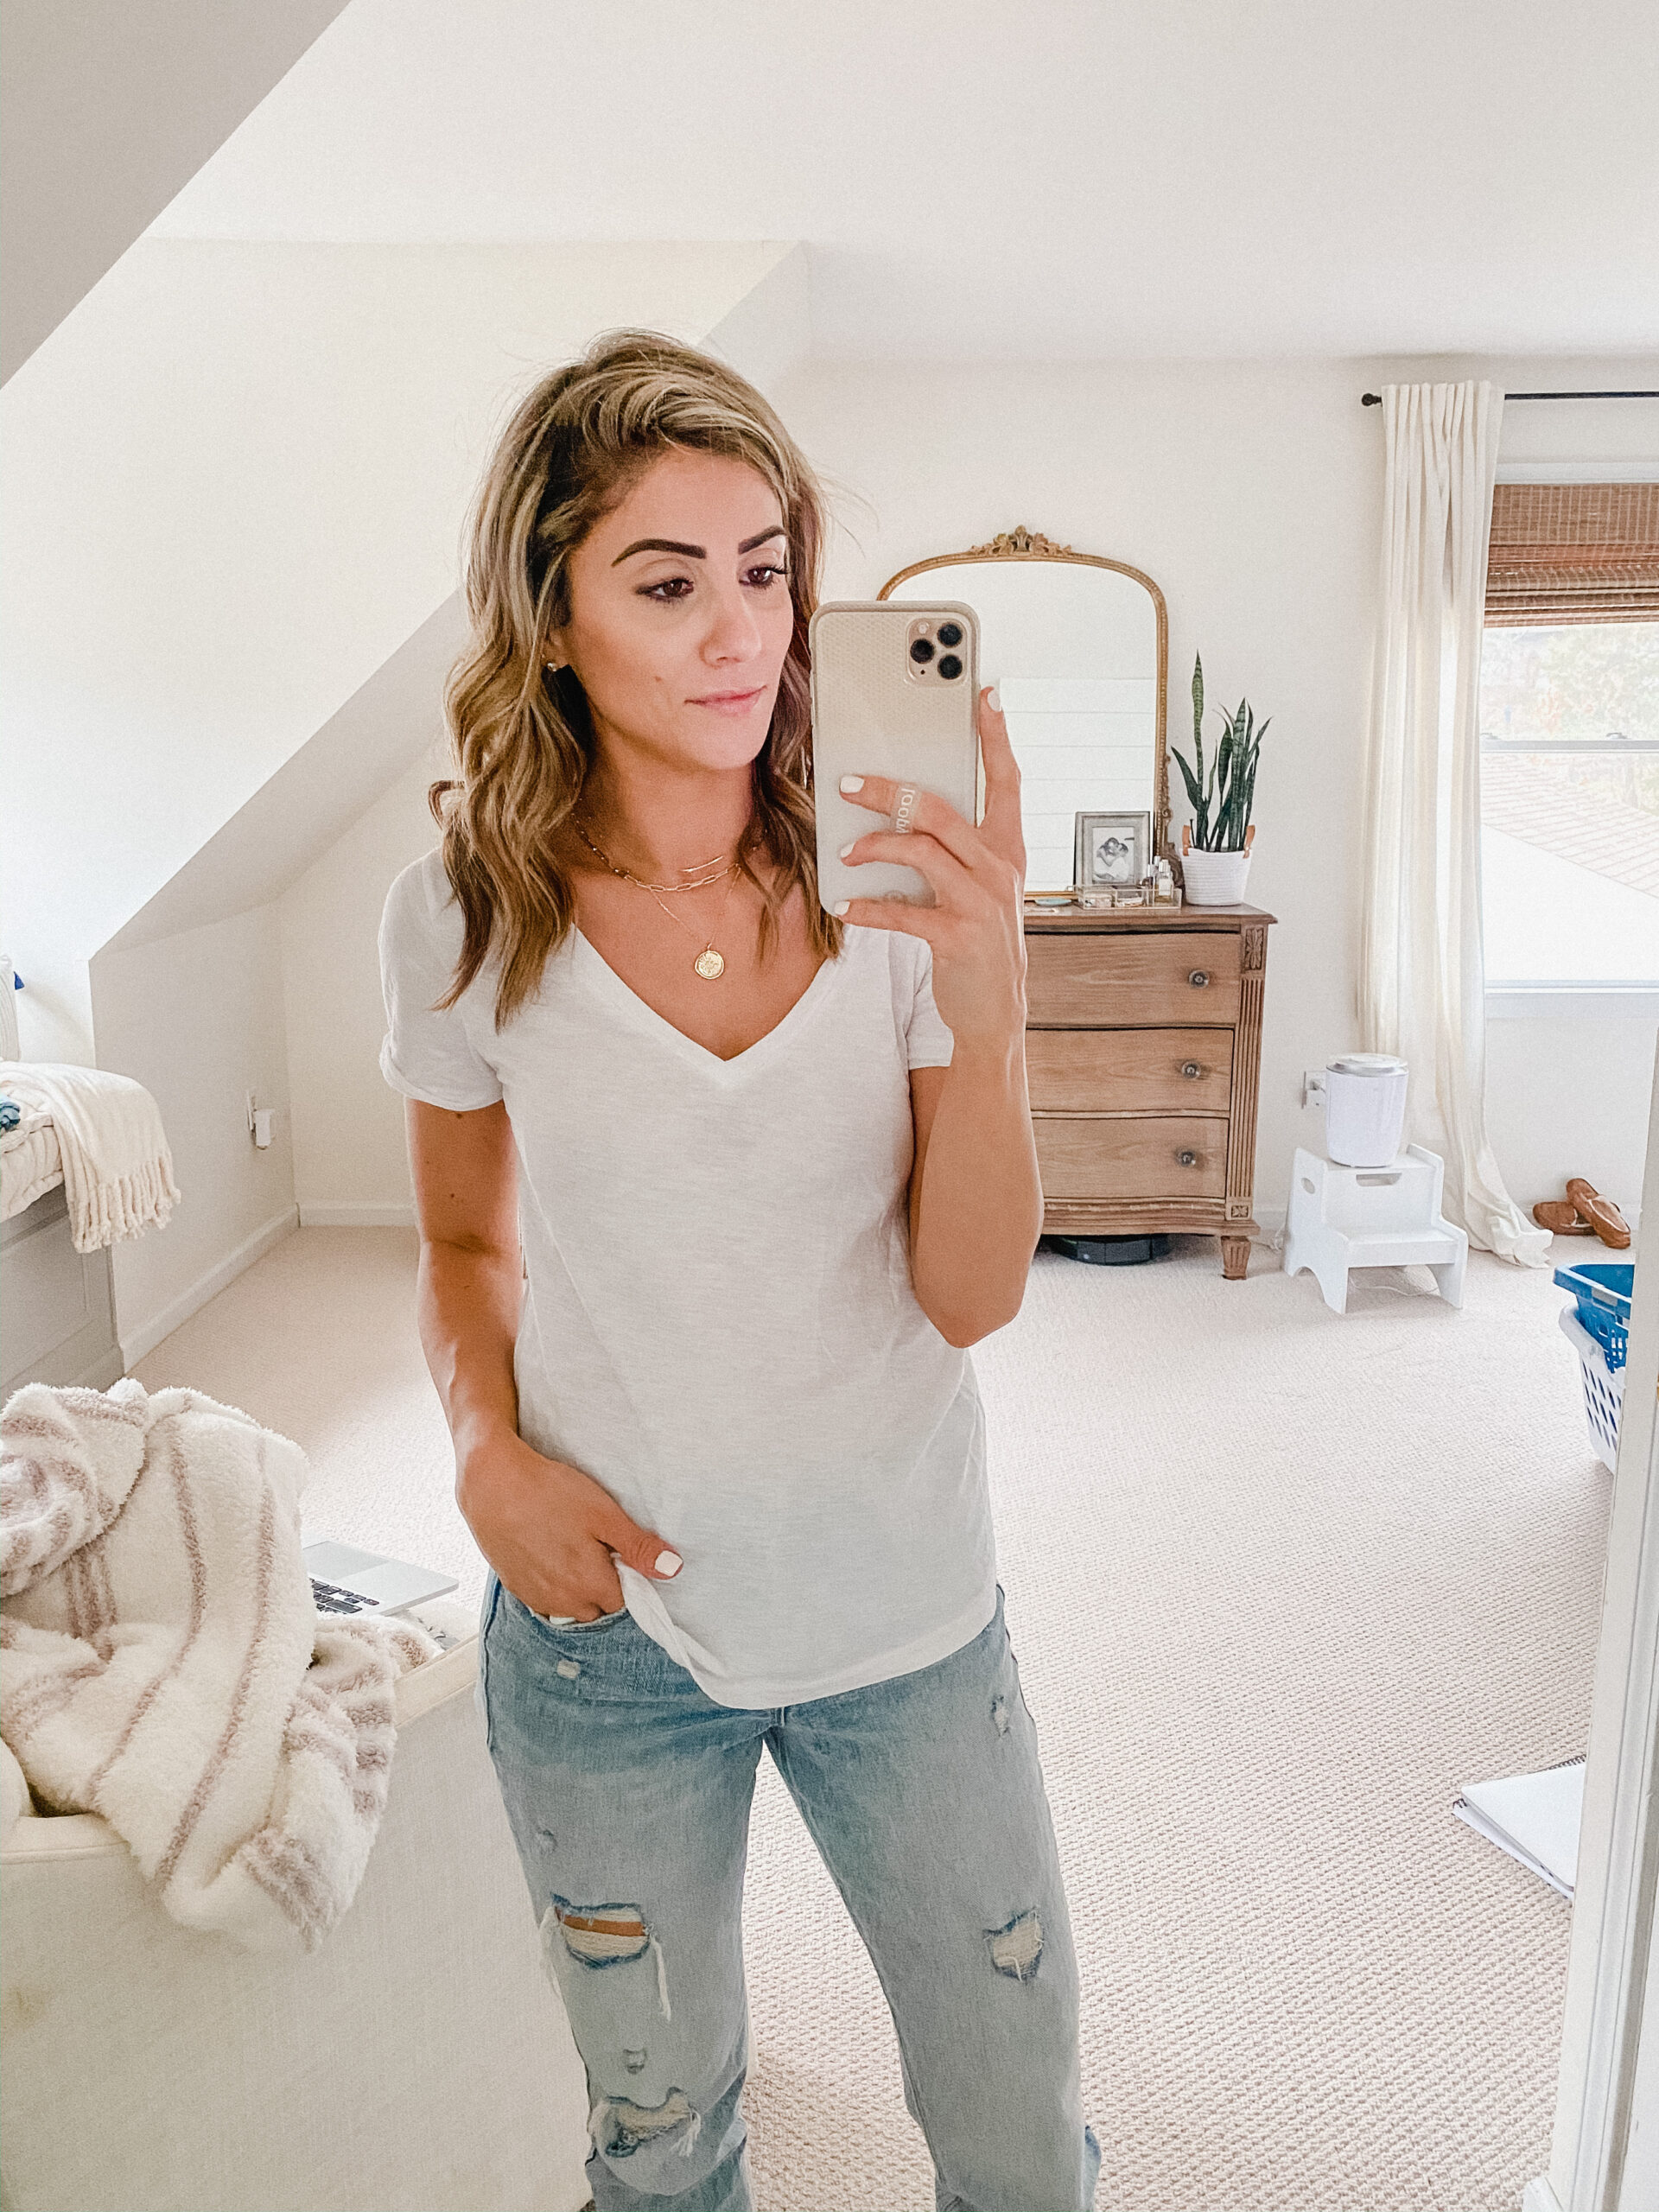 Looking for the Best White T-Shirts? Connecticut life and style blogger Lauren McBride reviews several options to find the best.